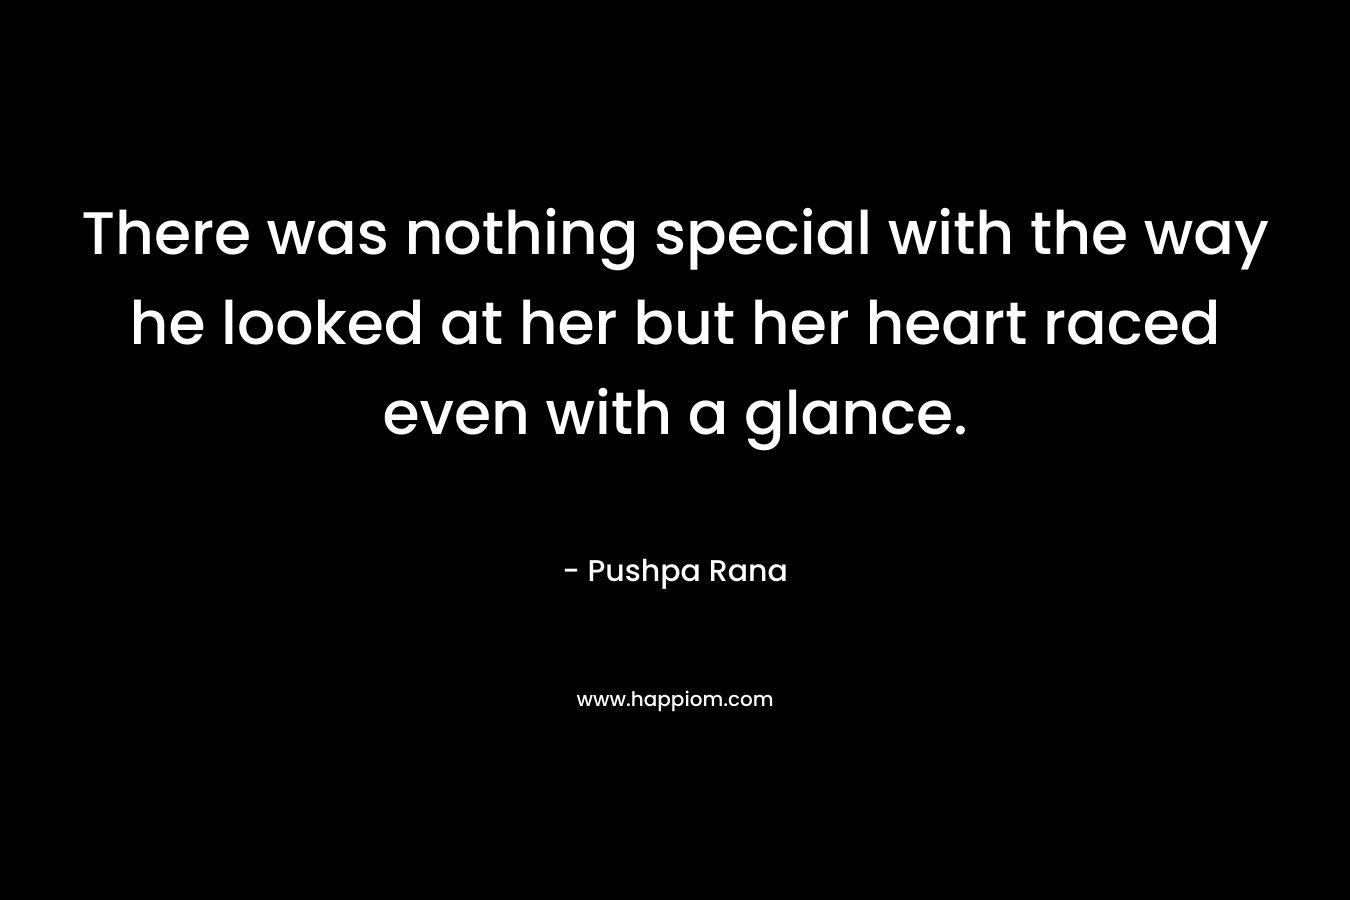 There was nothing special with the way he looked at her but her heart raced even with a glance. – Pushpa Rana